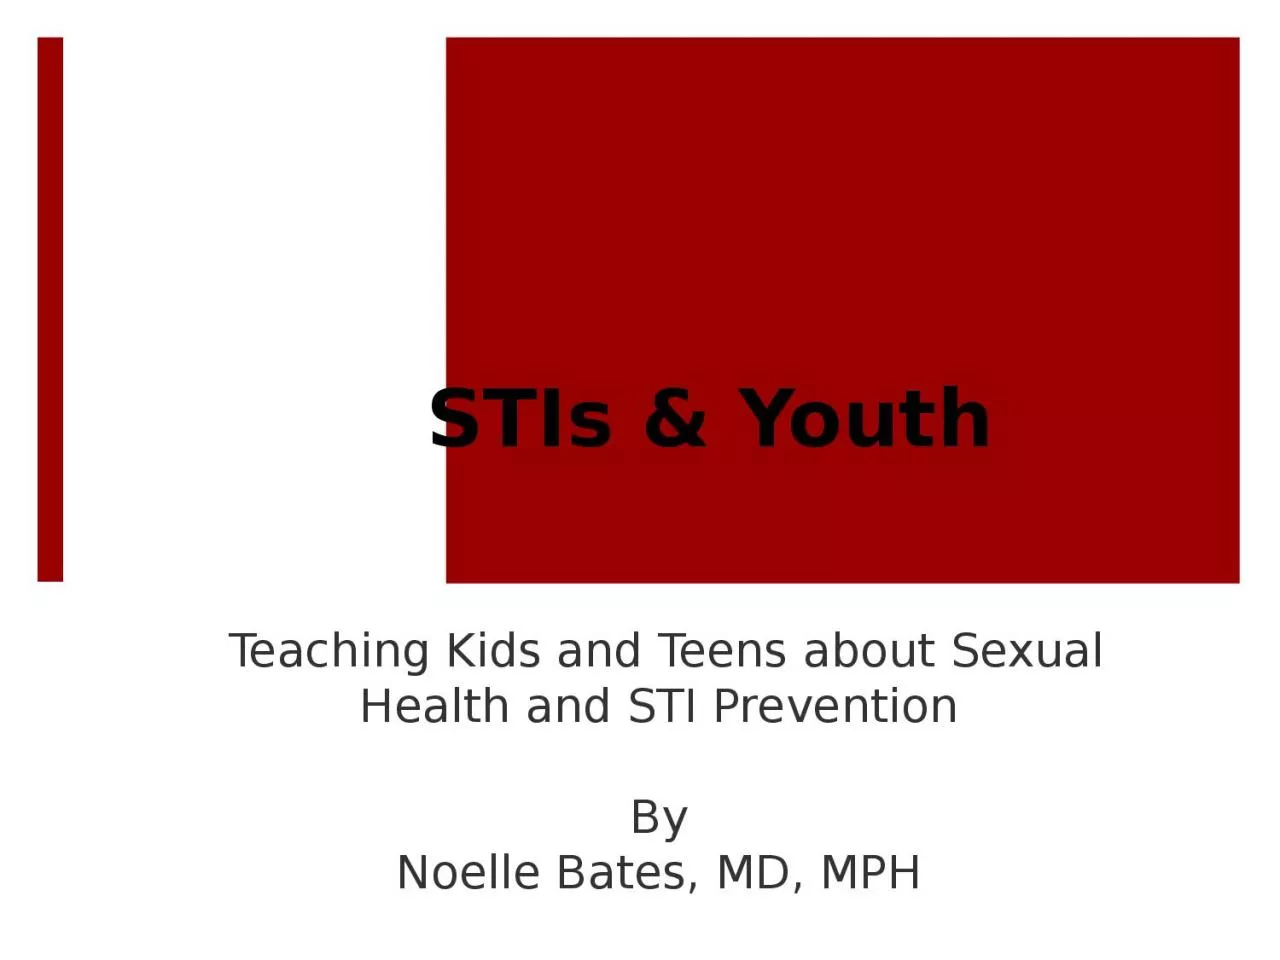 STIs & Youth    Teaching Kids and Teens about Sexual Health and STI Prevention